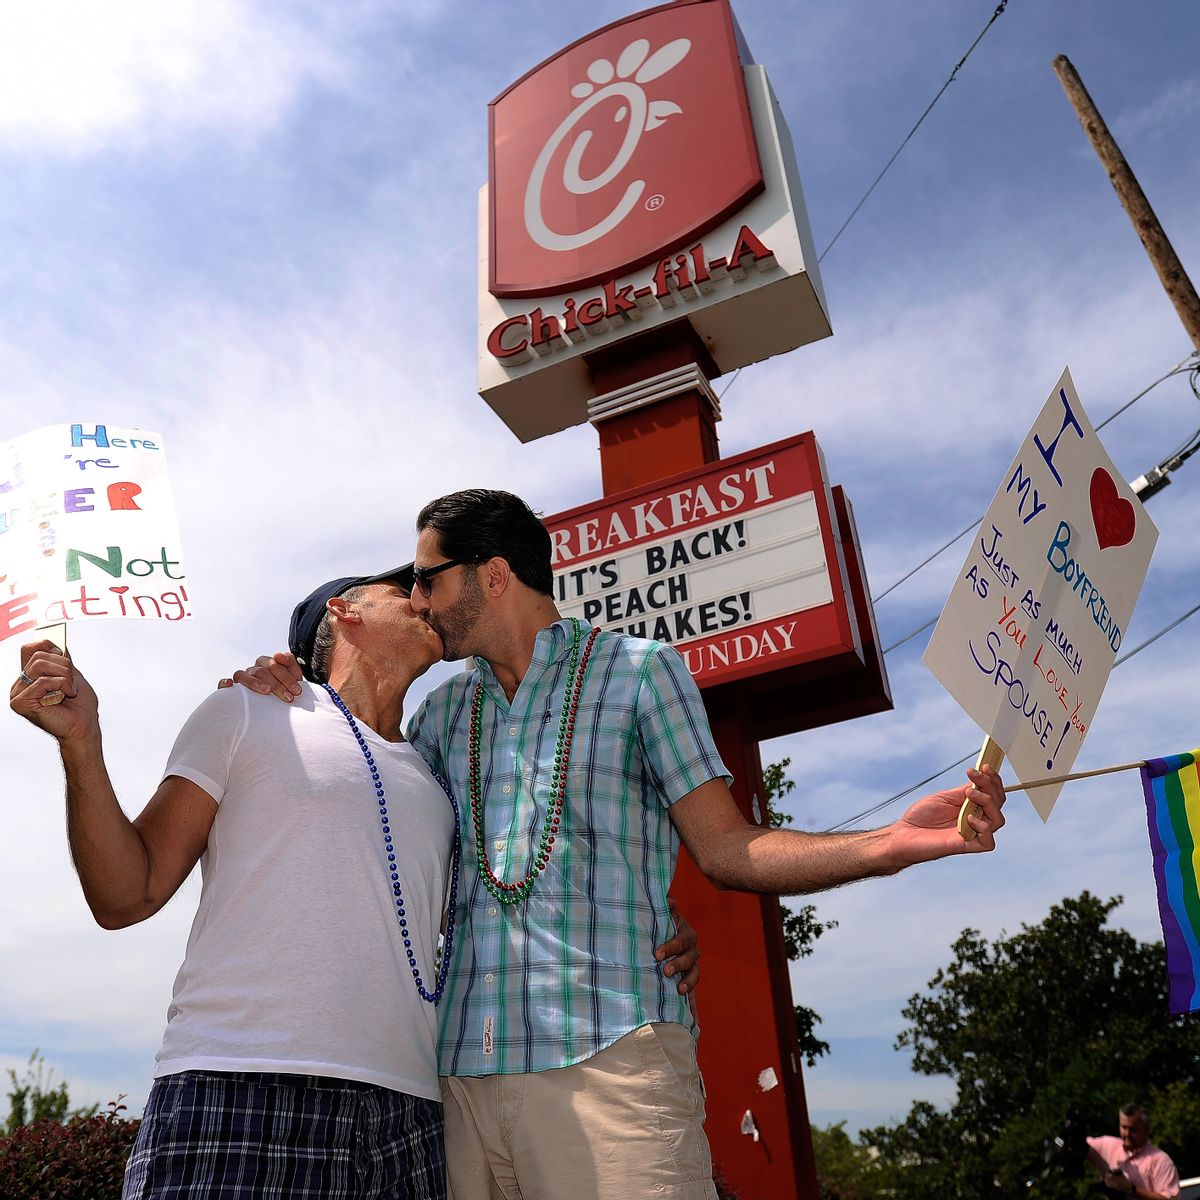 Jim Fortier, left, and Mark Toomajian, kiss as they join about two dozen members of gay rights groups and others protesting outside a Chick-fil-A restaurant Friday. (AP/David Tulis)